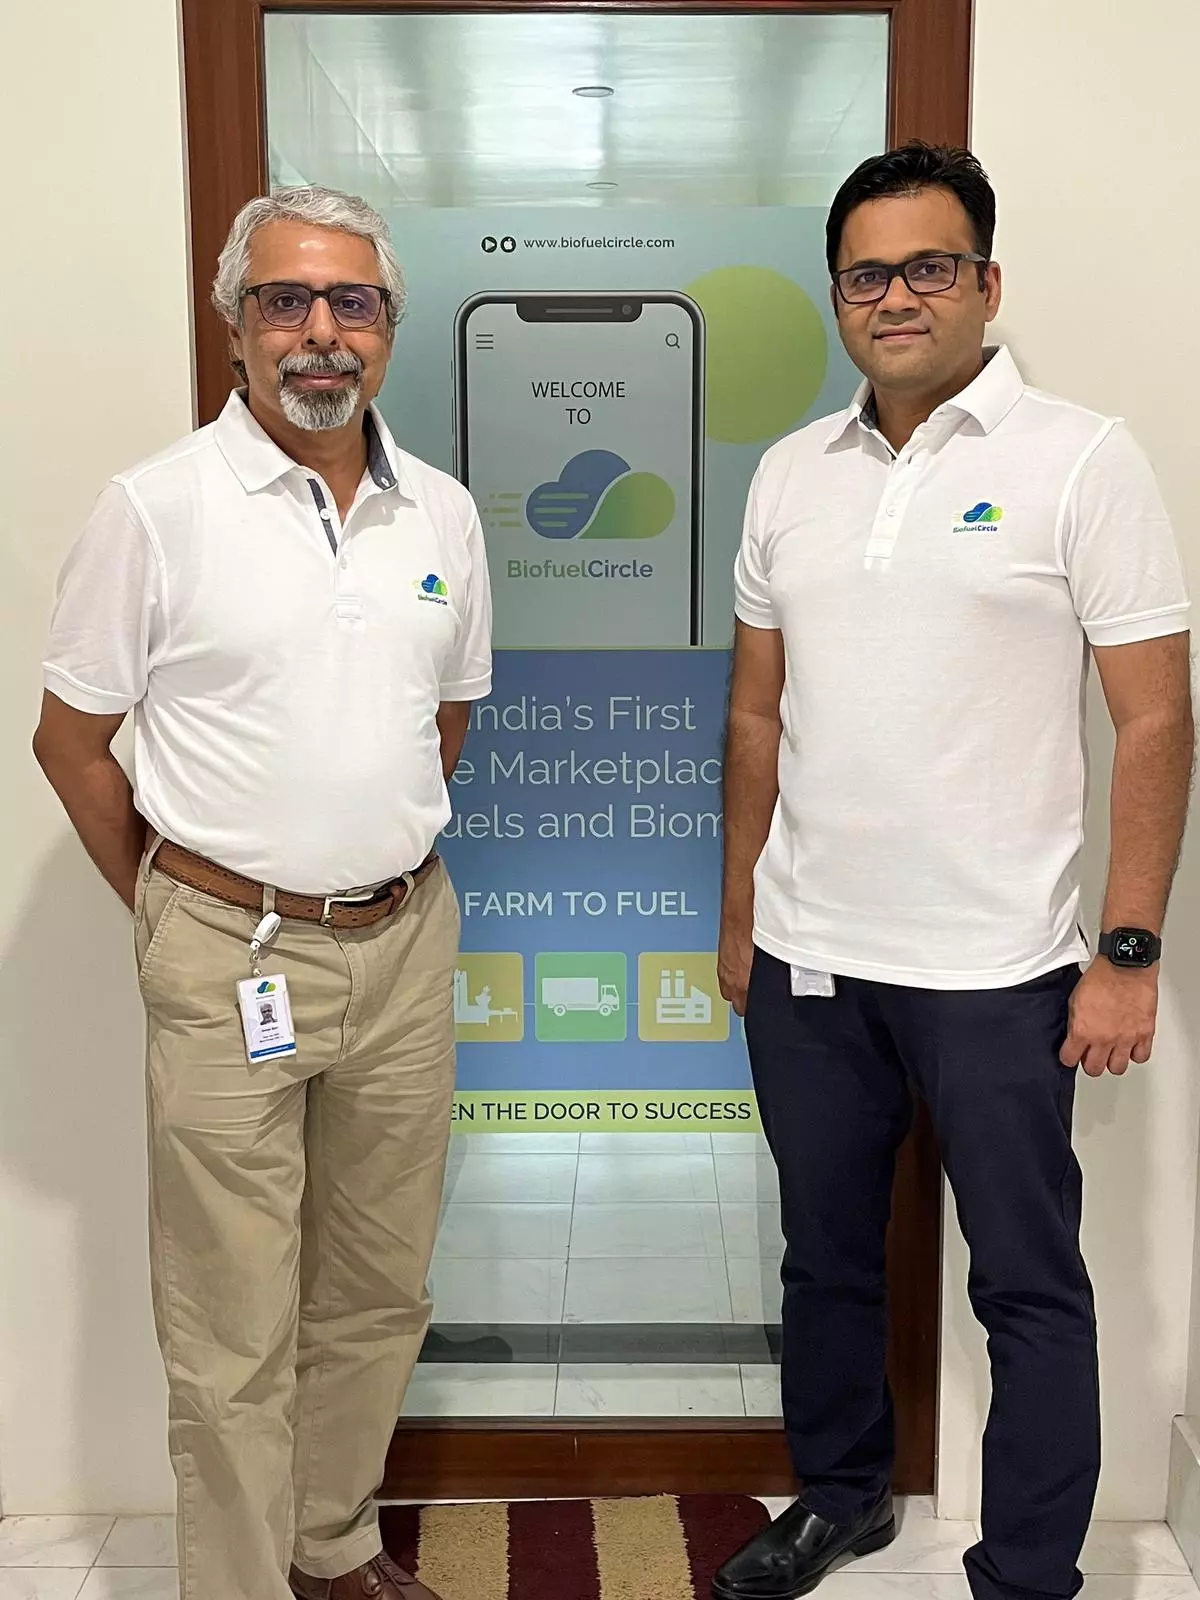 Suhas Baxi (left), CEO and co-founder, BiofuelCircle, with Ashwin Save, co-founder